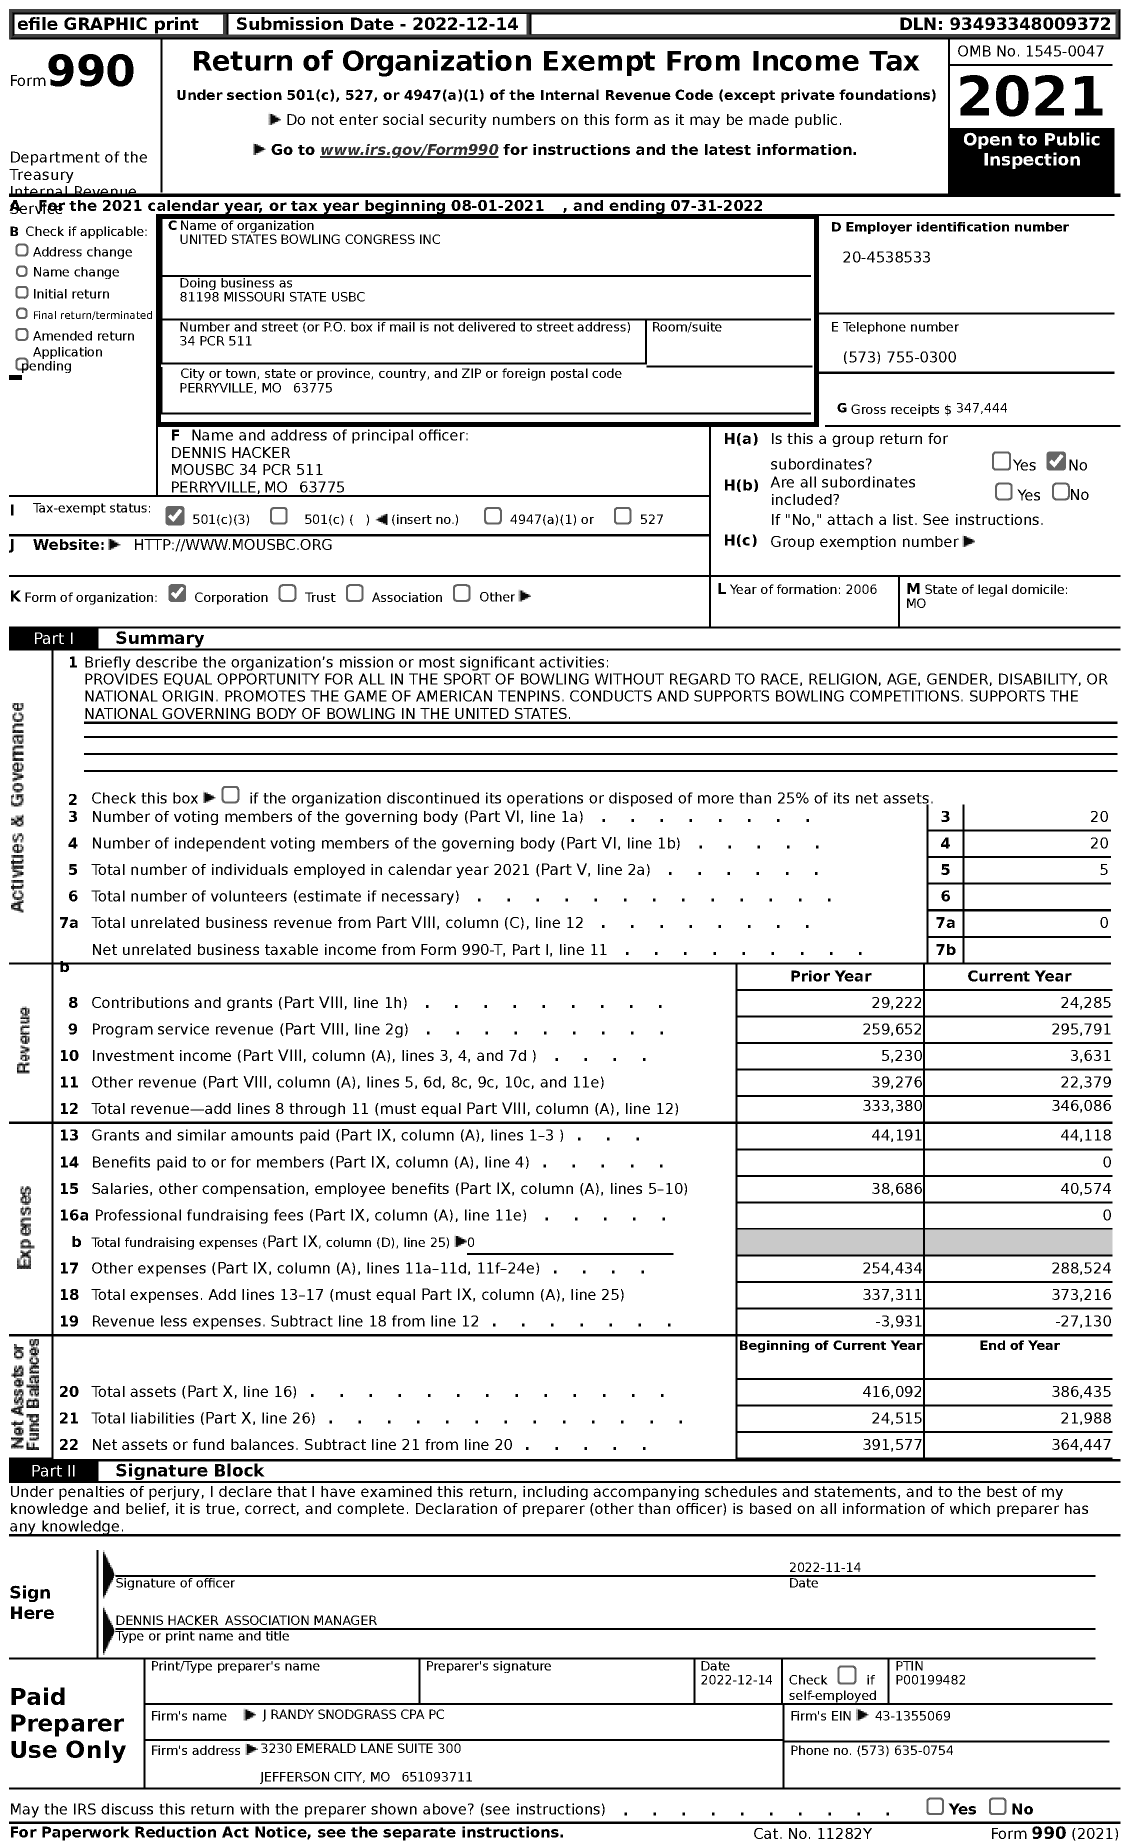 Image of first page of 2021 Form 990 for United States Bowling Congress - 81198 Missouri State Usbc